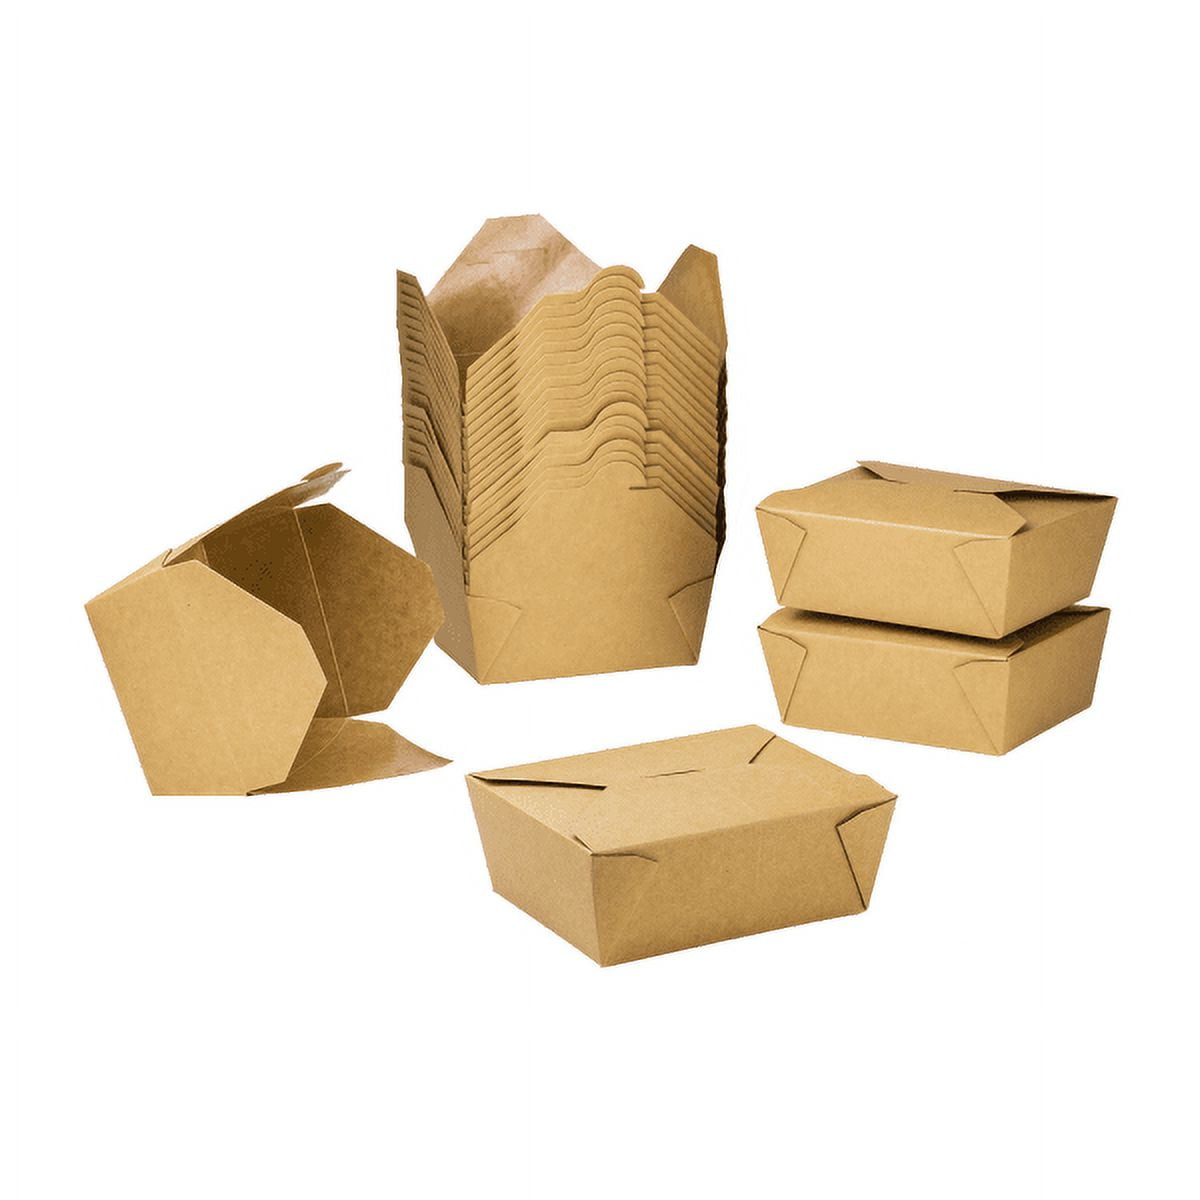 Lot45 Sandwich Paper Craft Box - 30pk 7.5in Disposable Food Containers with Lids